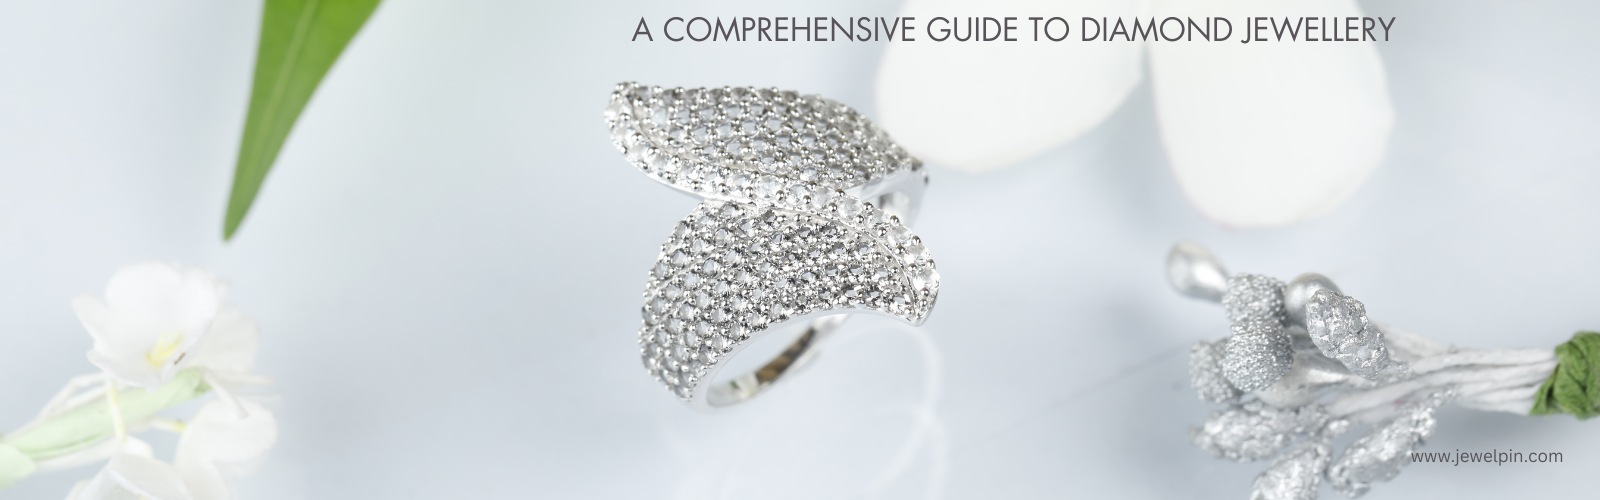 A Comprehensive Guide to Diamond Jewellery by JewelPin